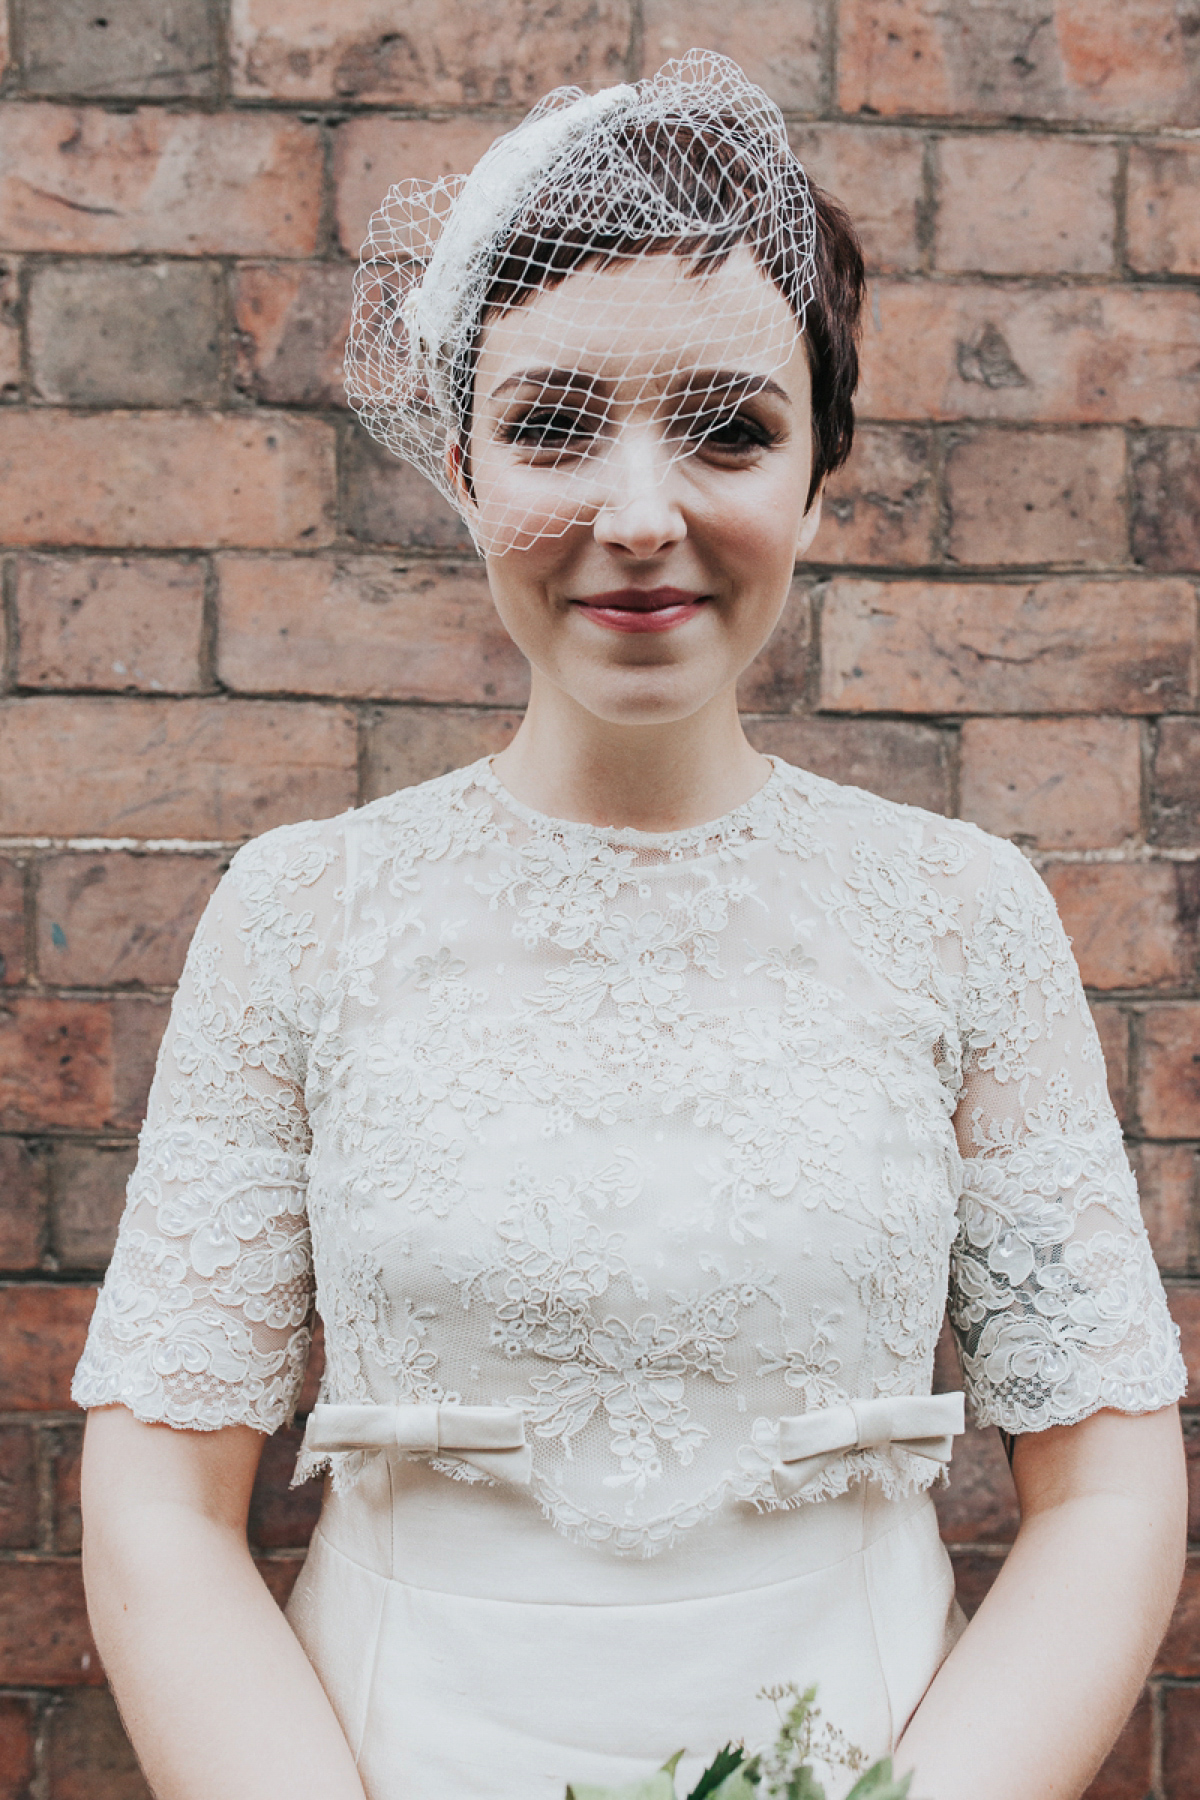 A short wedding dress and birdcage veil for a 1960's inspired bride. Image by Indie Photography.